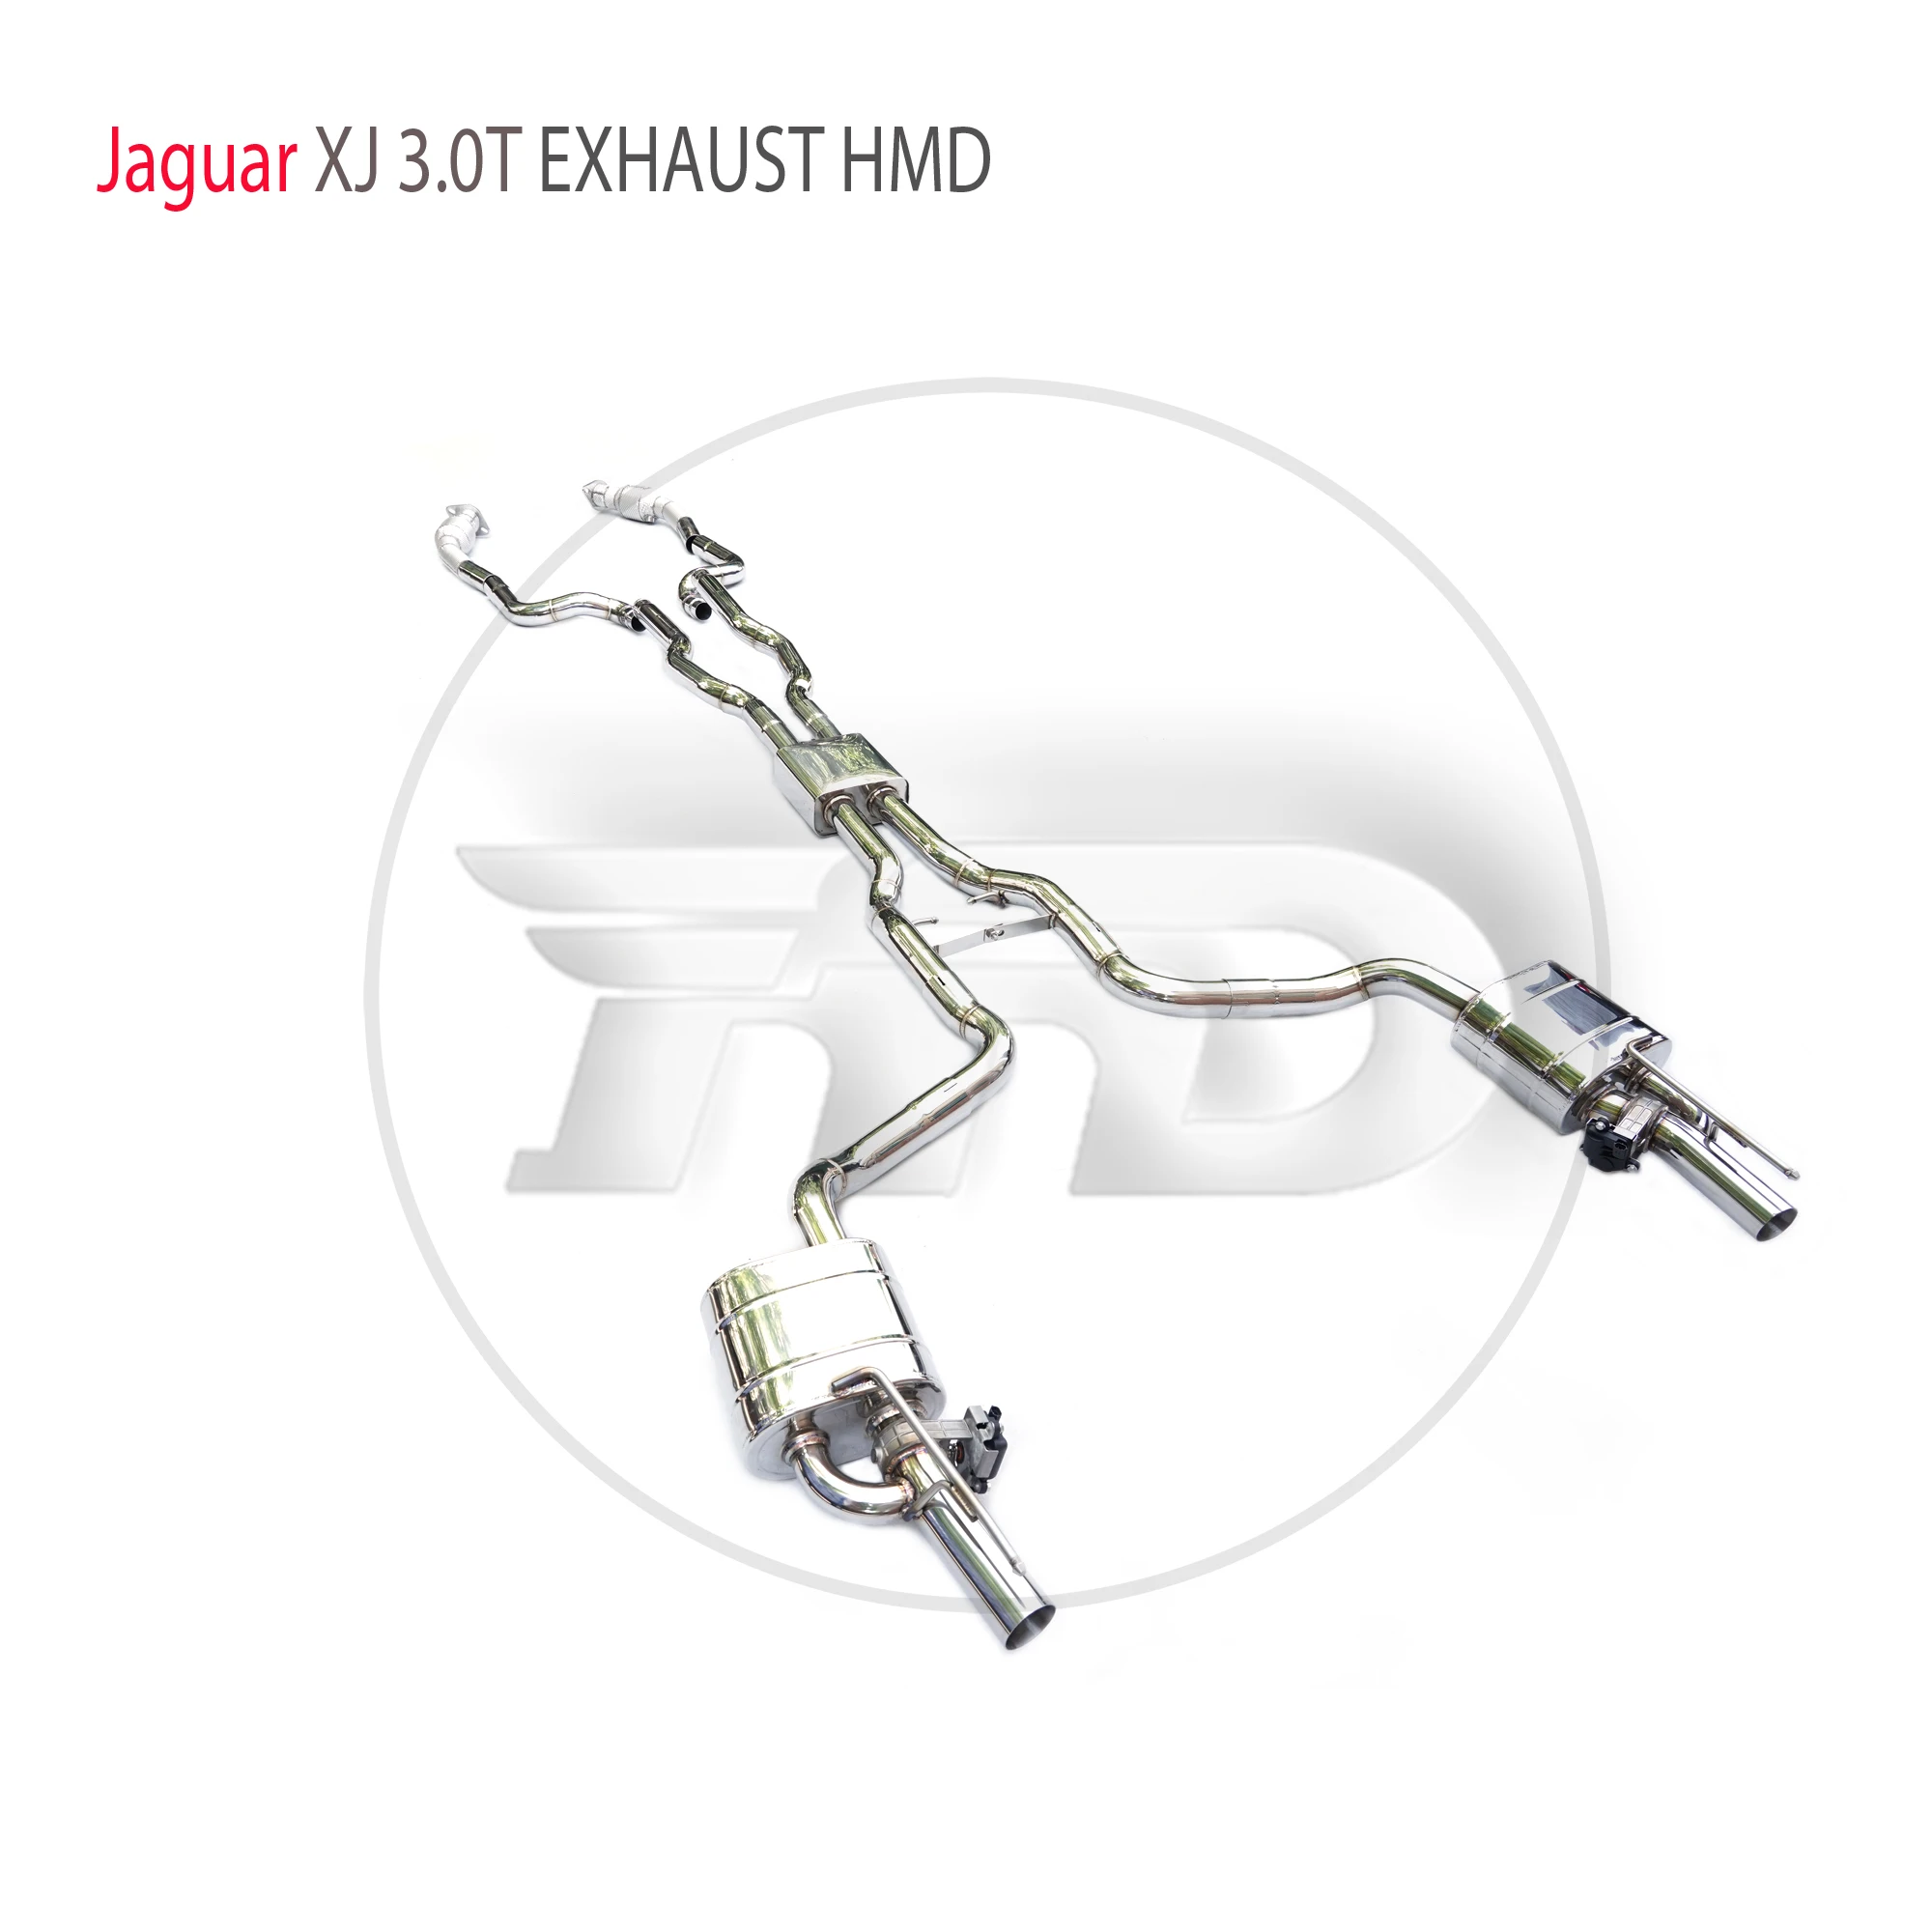 

HMD Stainless Steel Exhaust System Performance Catback Downpipe For Jaguar XJ 3.0T Modification Electronic Valve Muffler